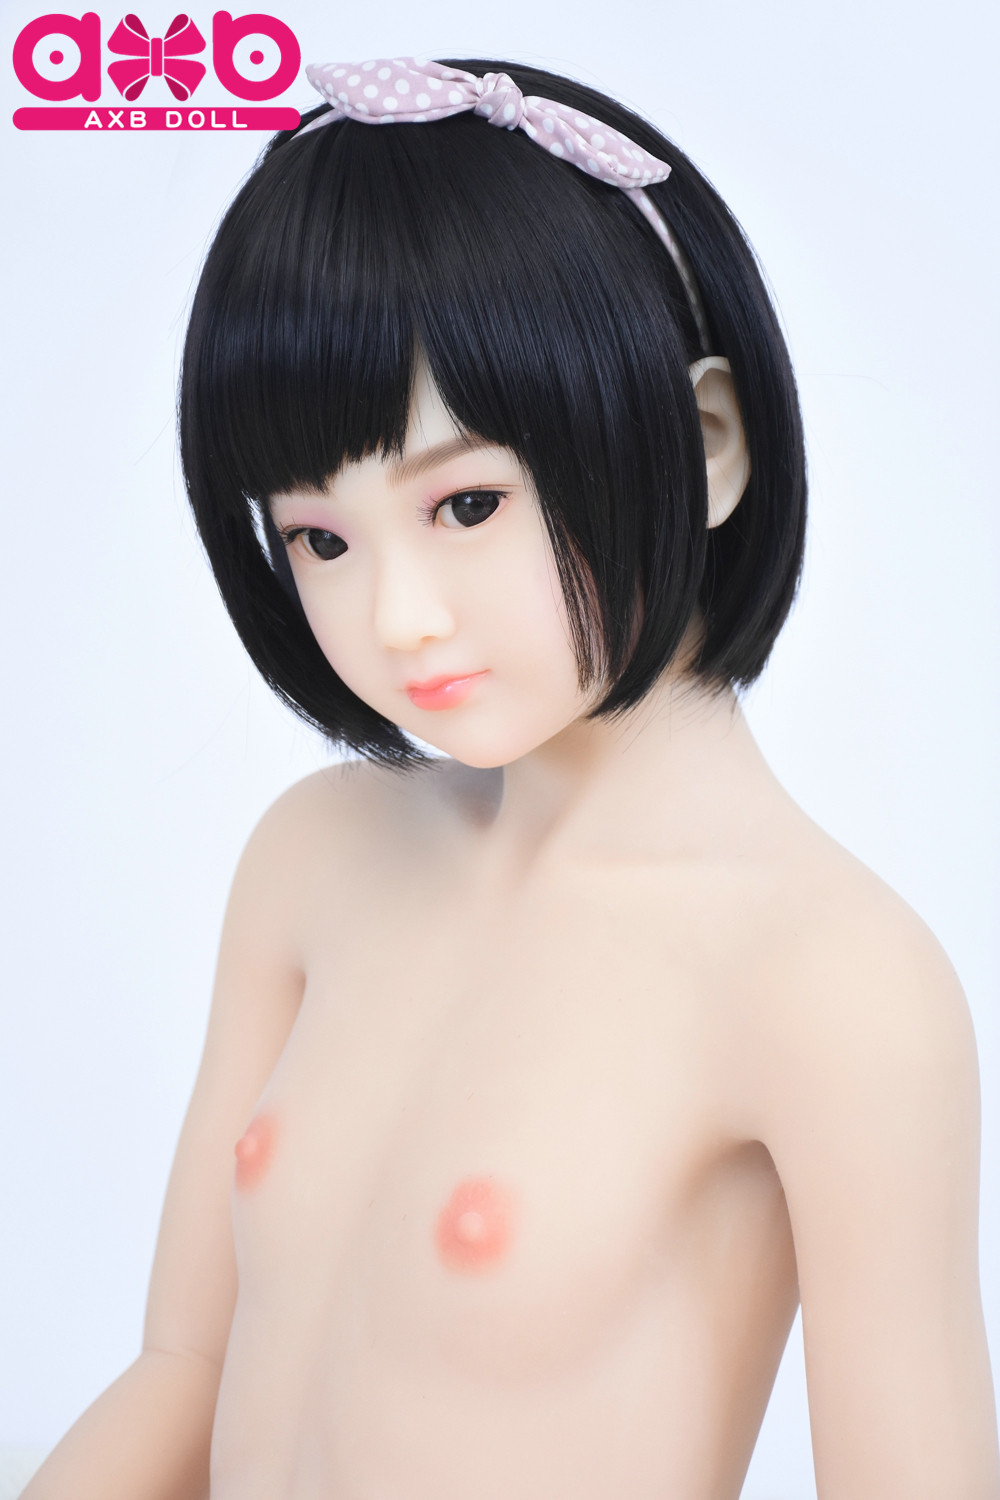 AXBDOLL A14# A-Cup TPE Sex Doll Full Body Love Dolls For Men - Click Image to Close